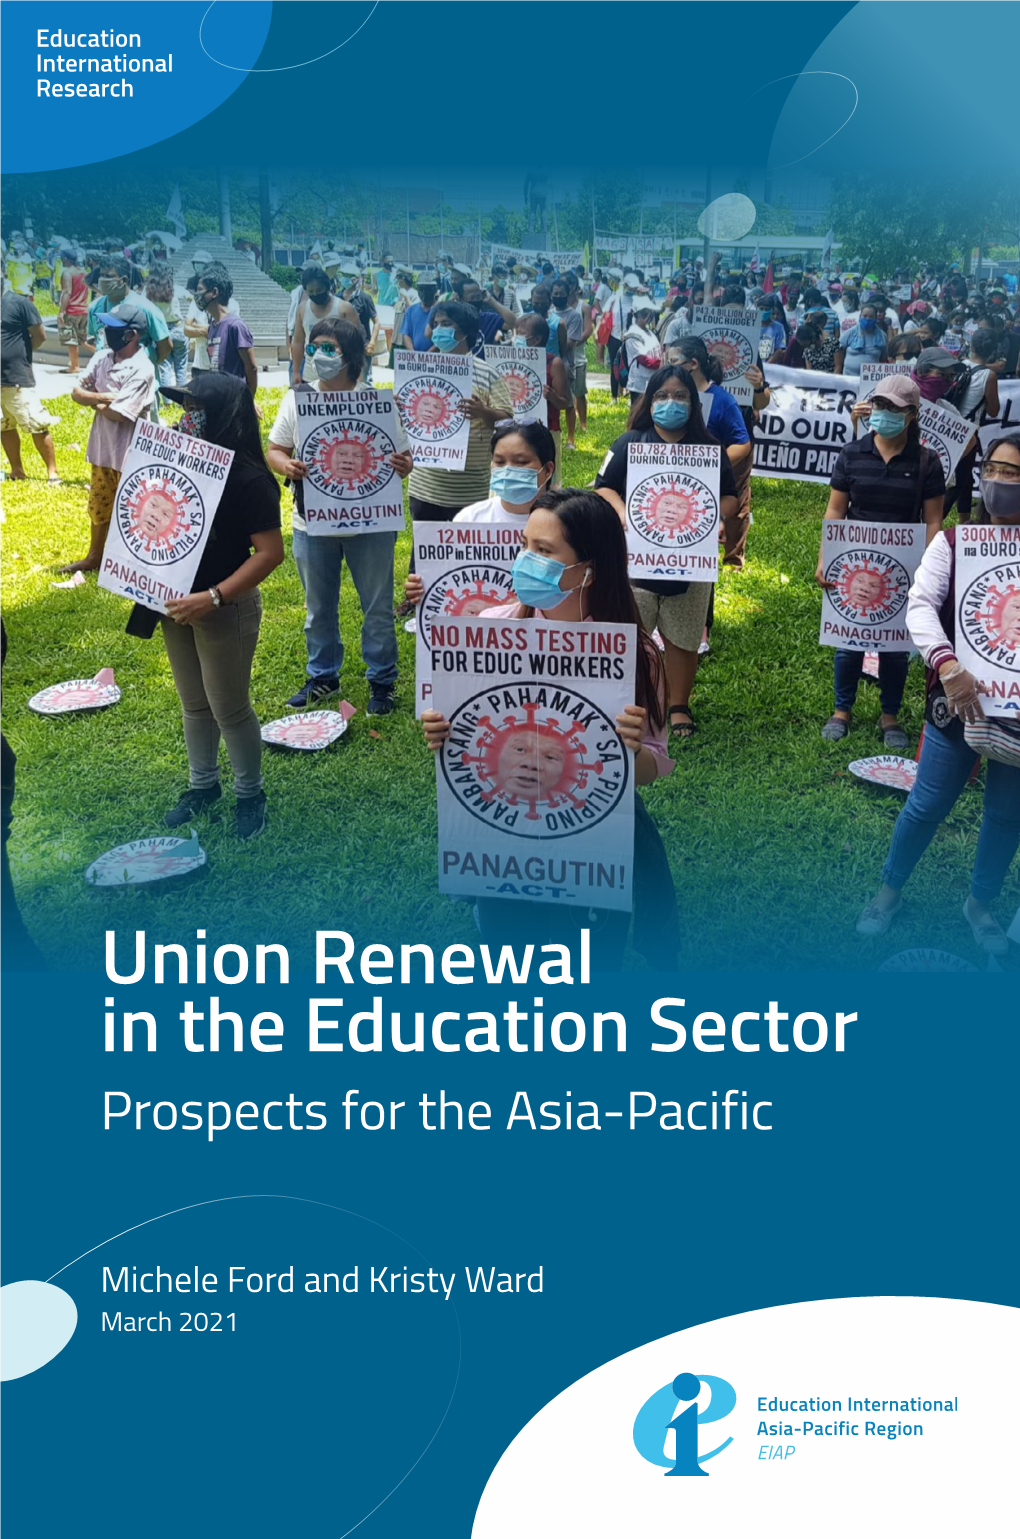 Union Renewal in the Education Sector Prospects for the Asia-Pacific